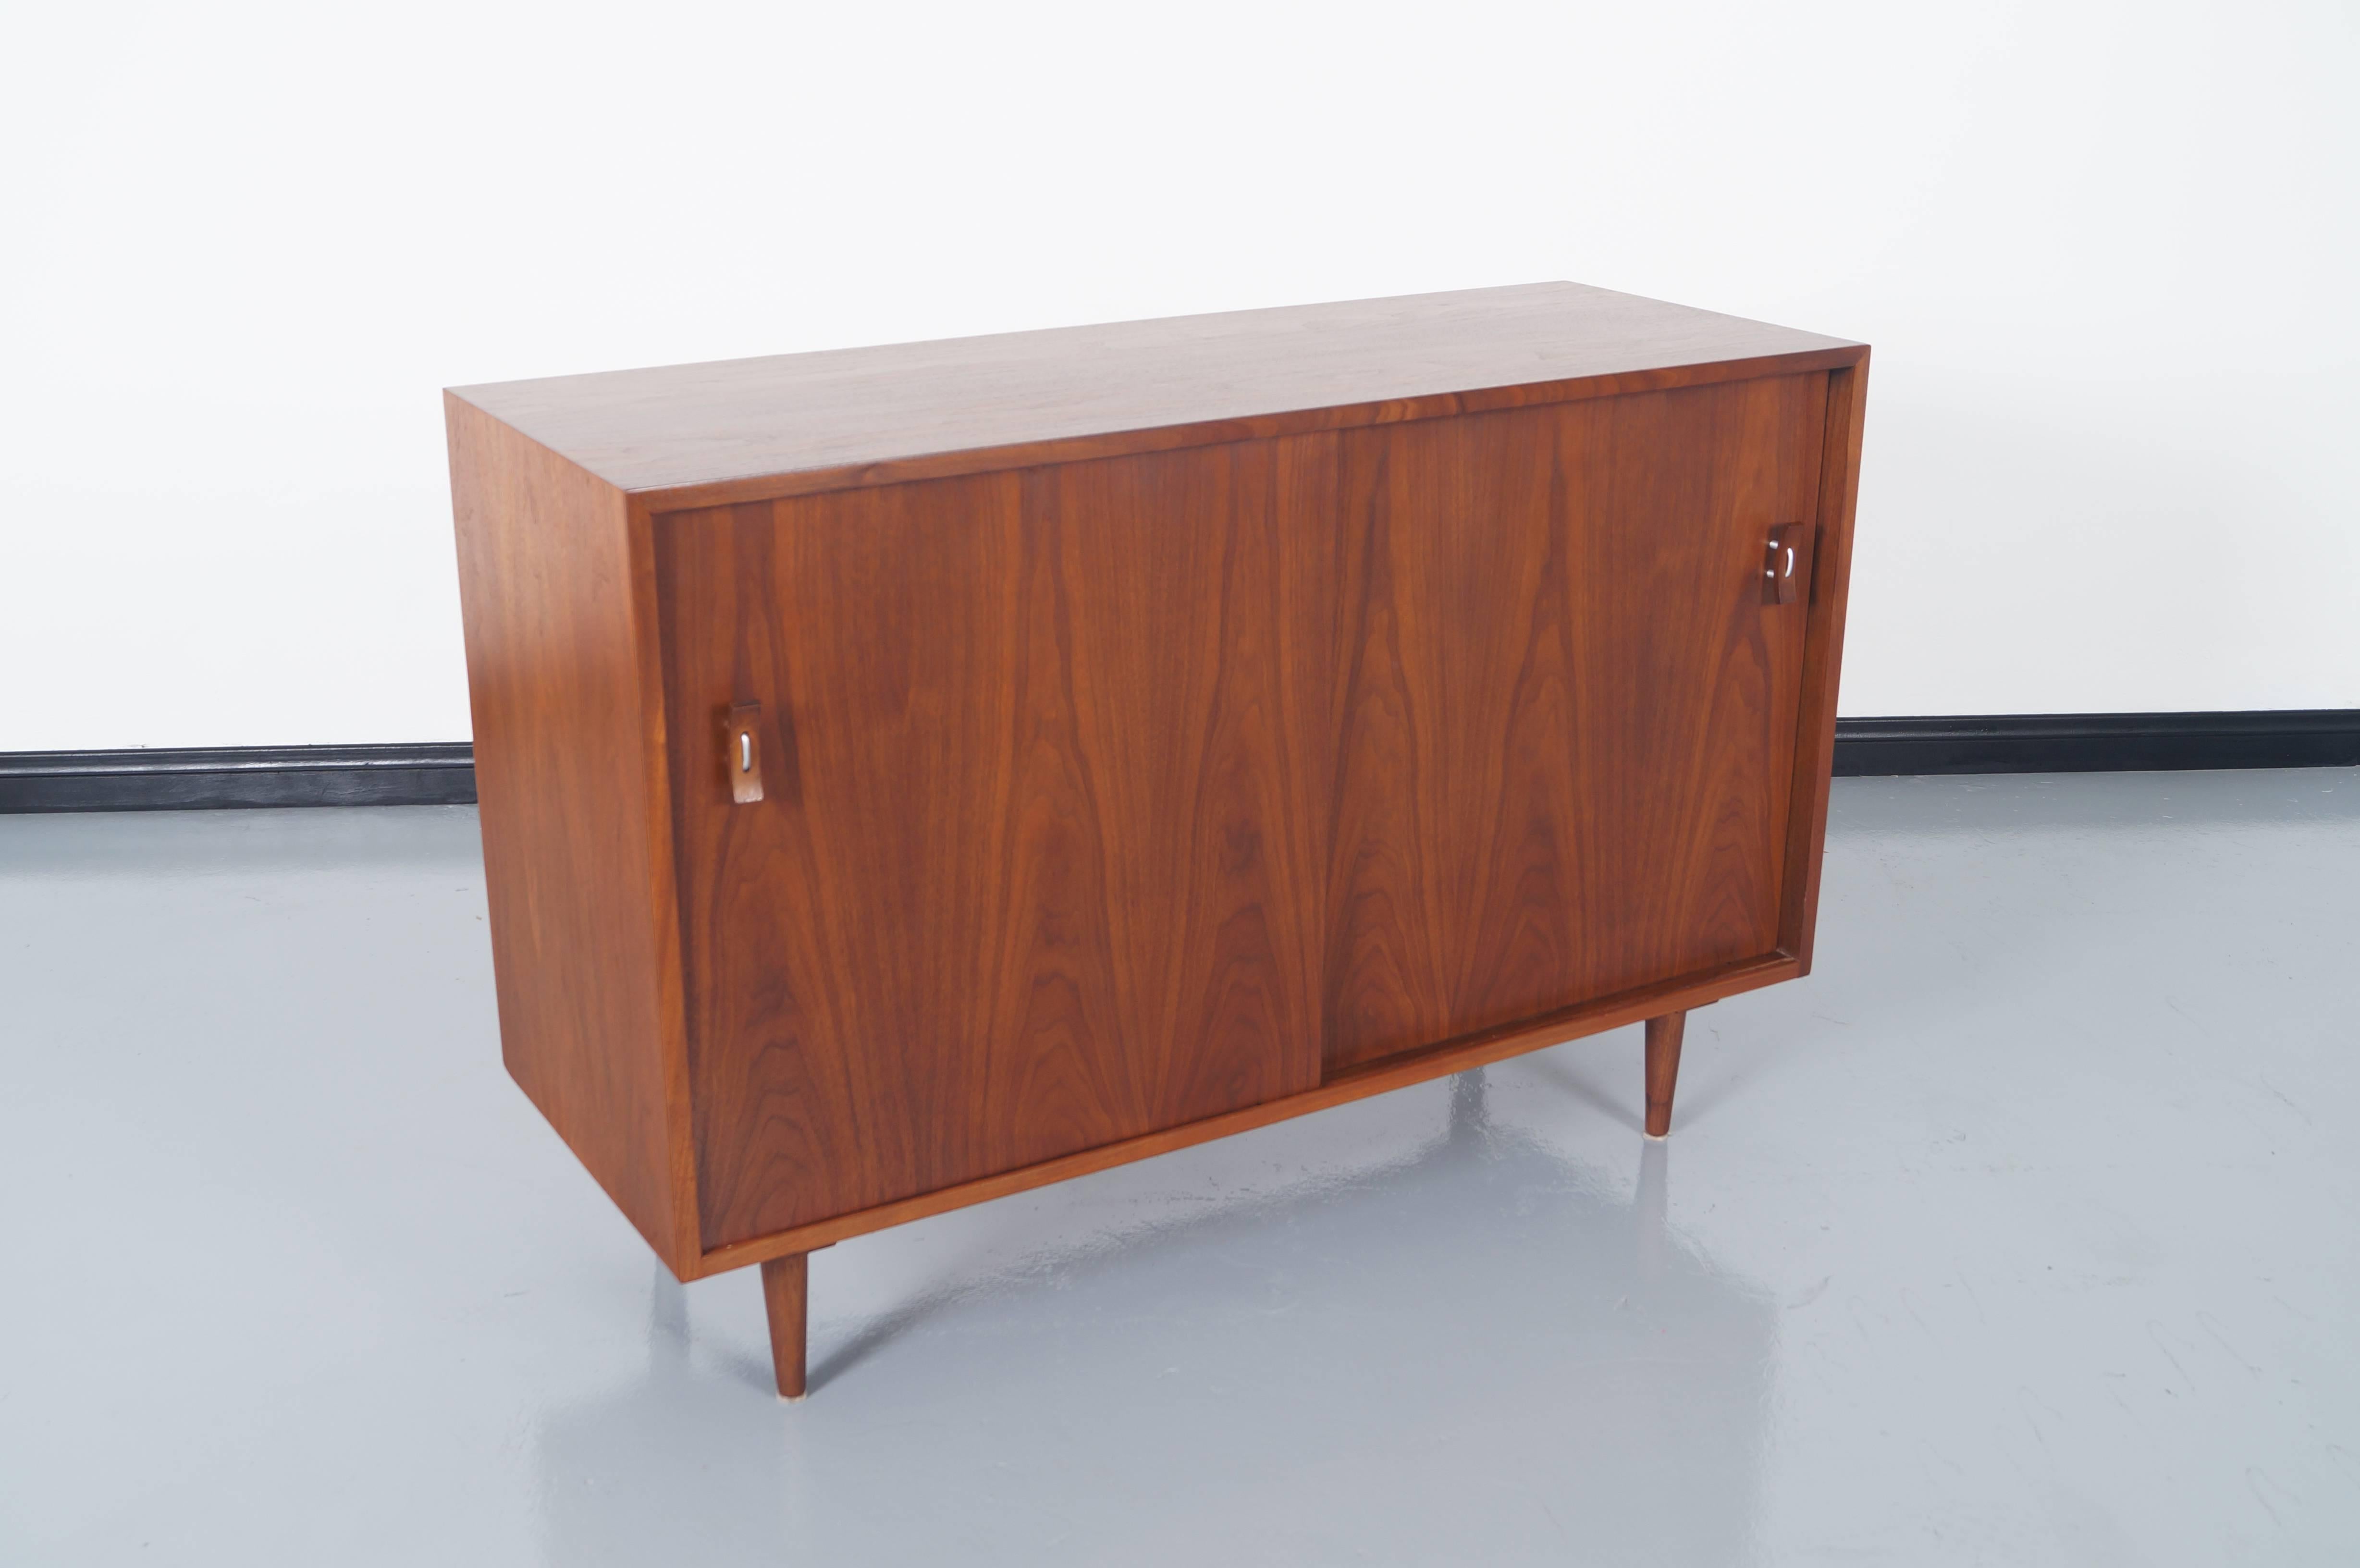 Vintage walnut sideboard by Stanley Young for Glenn of California. It features two sliding doors with sculptural pulls. Inside contains one adjustable shelf on the left side and four lacquer drawers on the right.